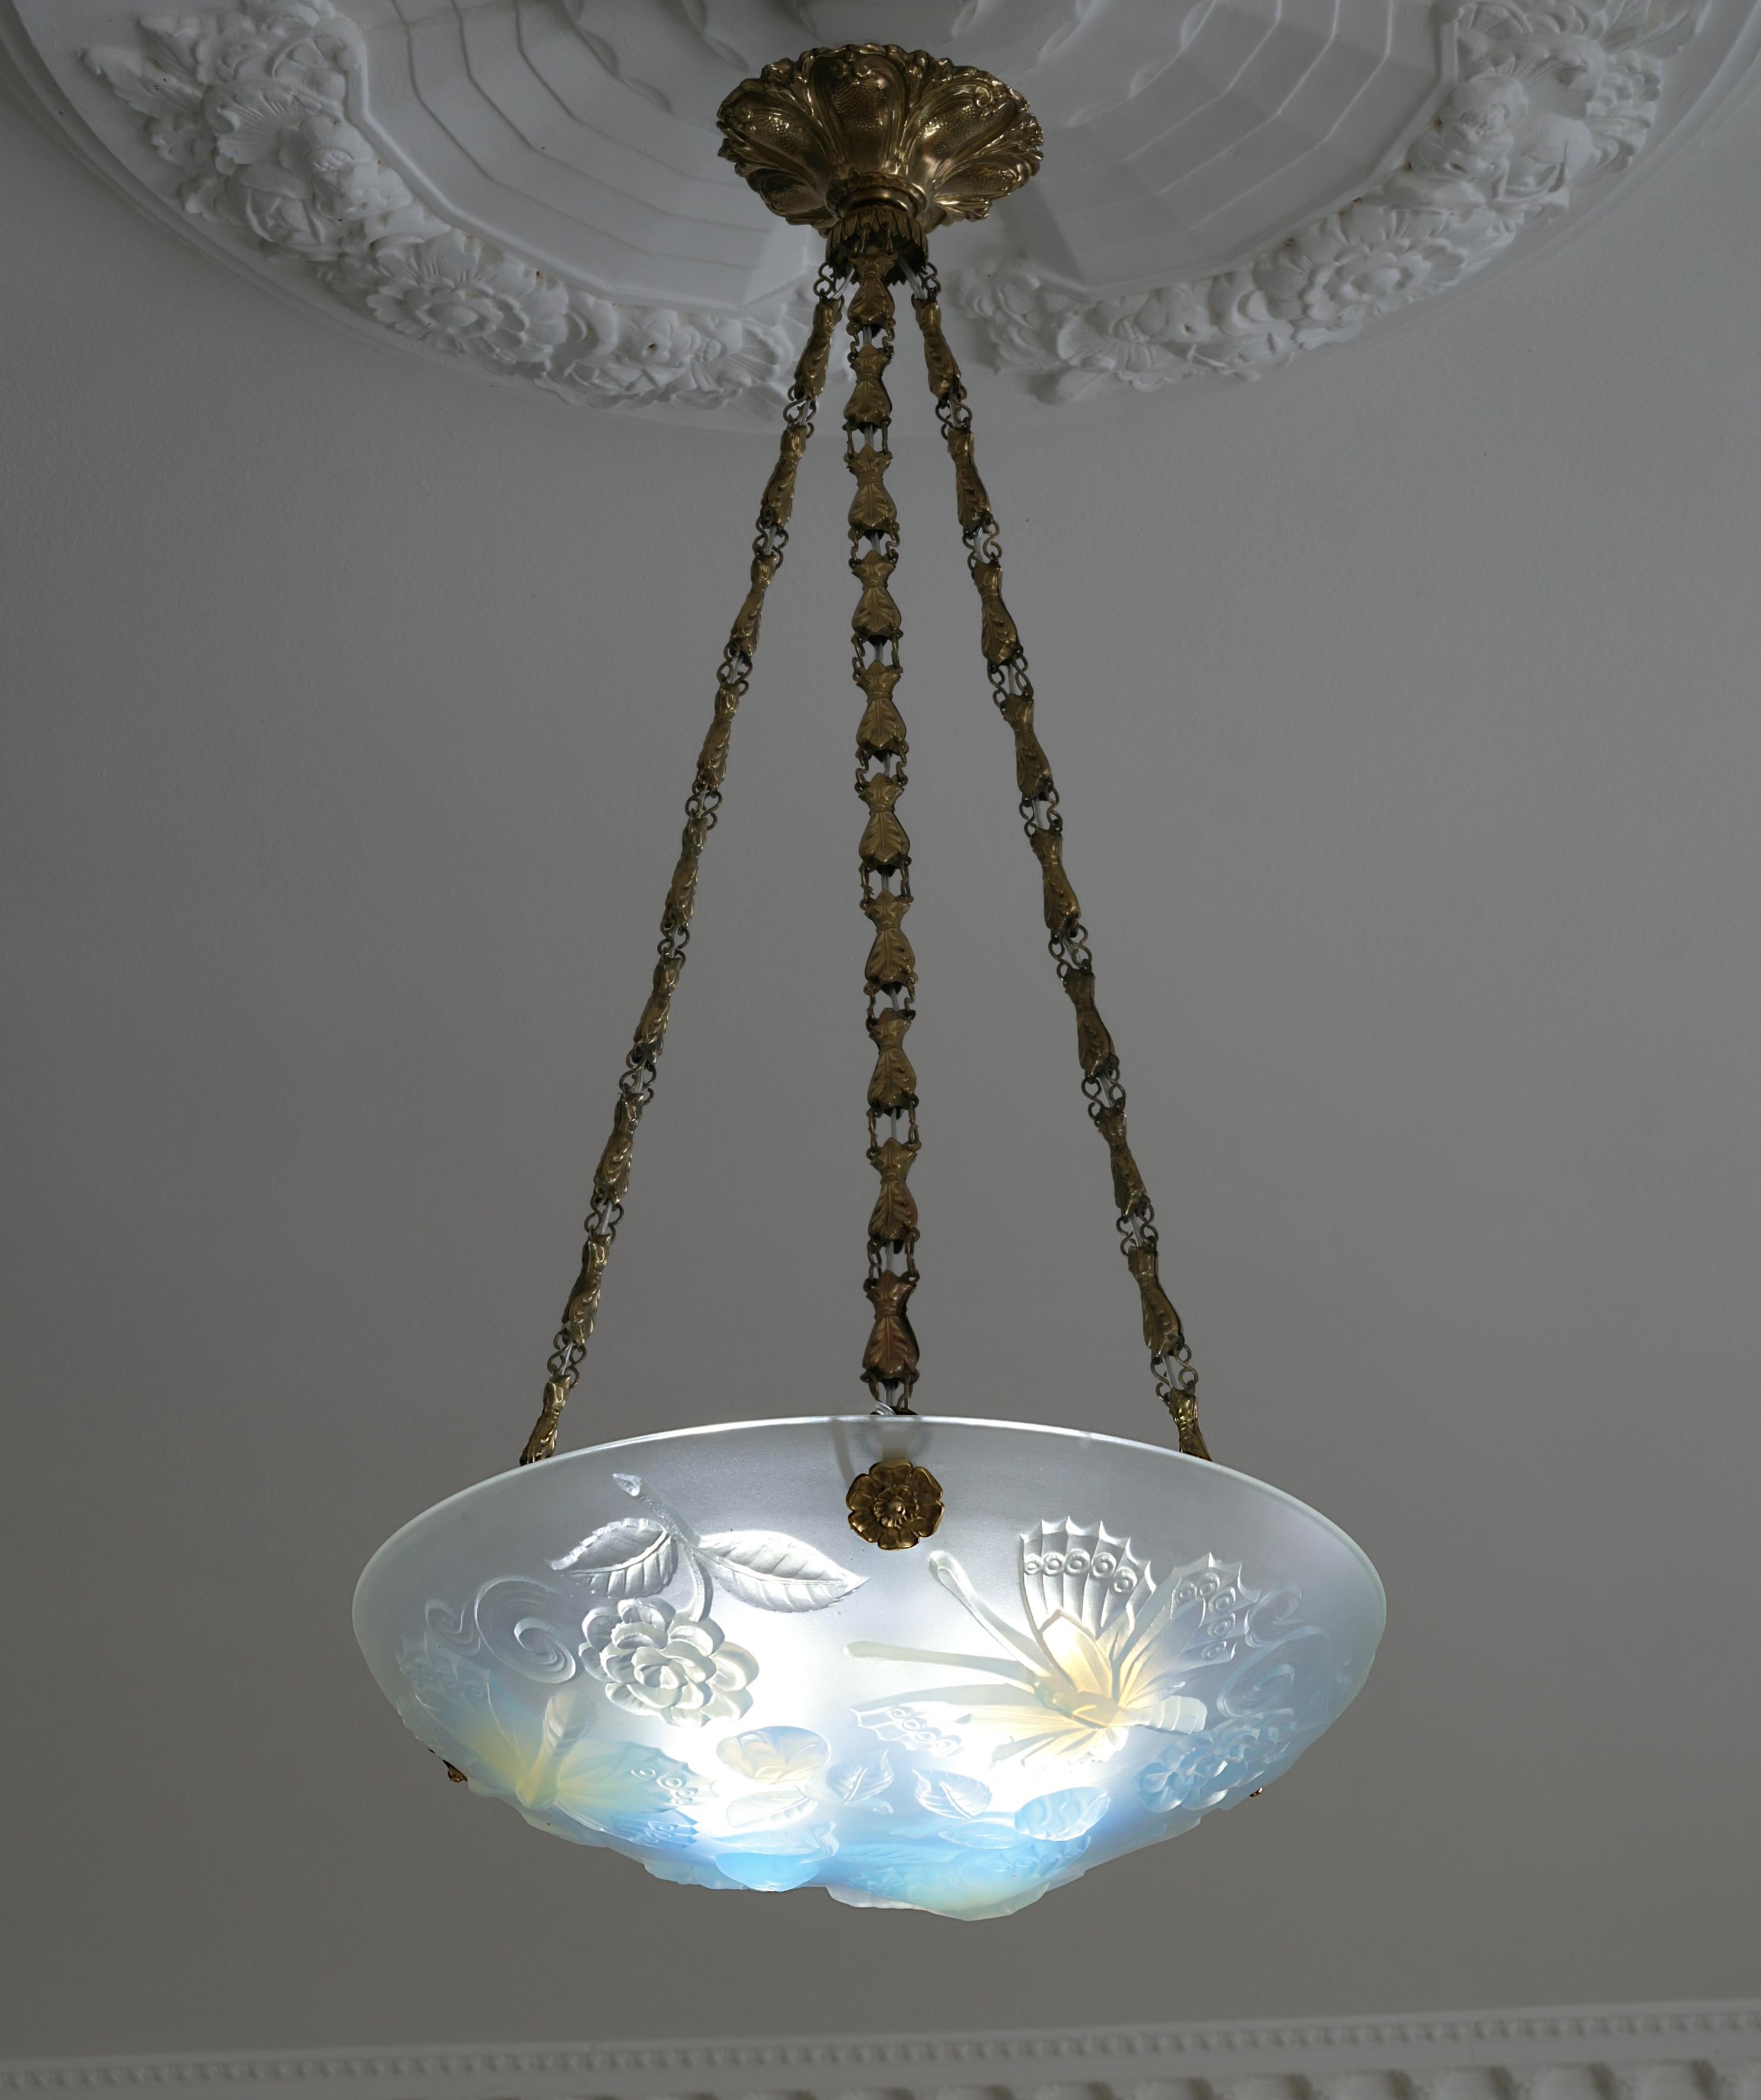 Molded Choisy-le-Roi French Art Deco Butterfly Opalescent Pendant Chandelier, 1930s For Sale